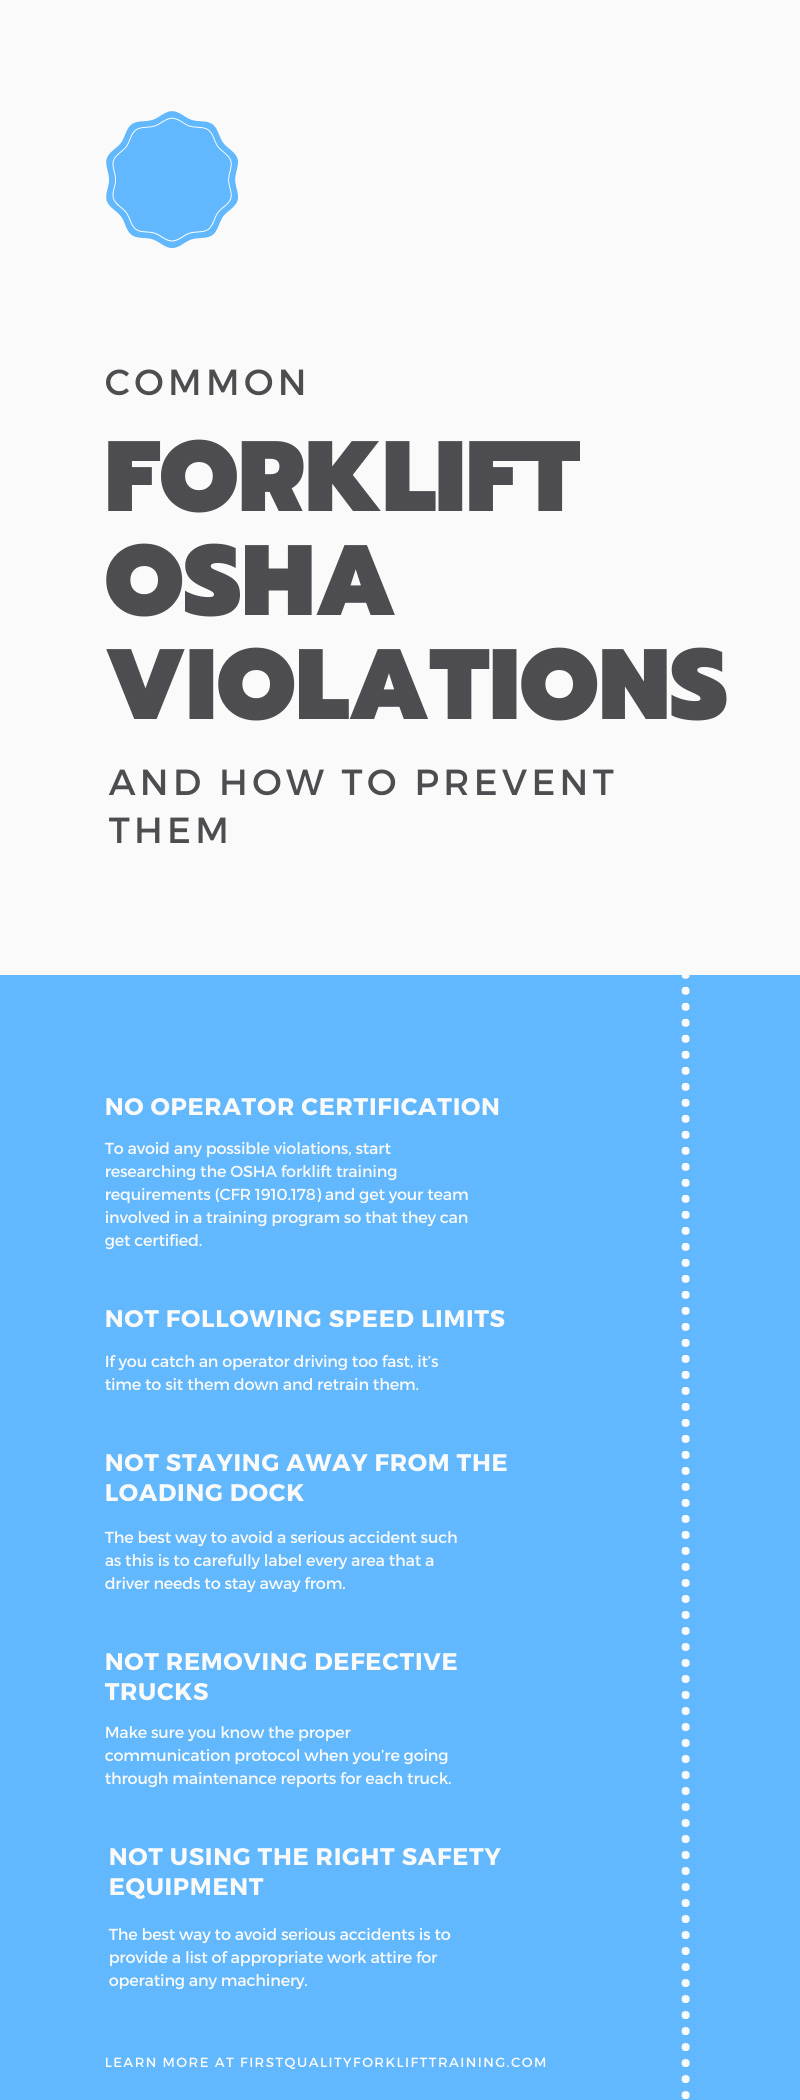 9 Common Forklift OSHA Violations and How To Prevent Them